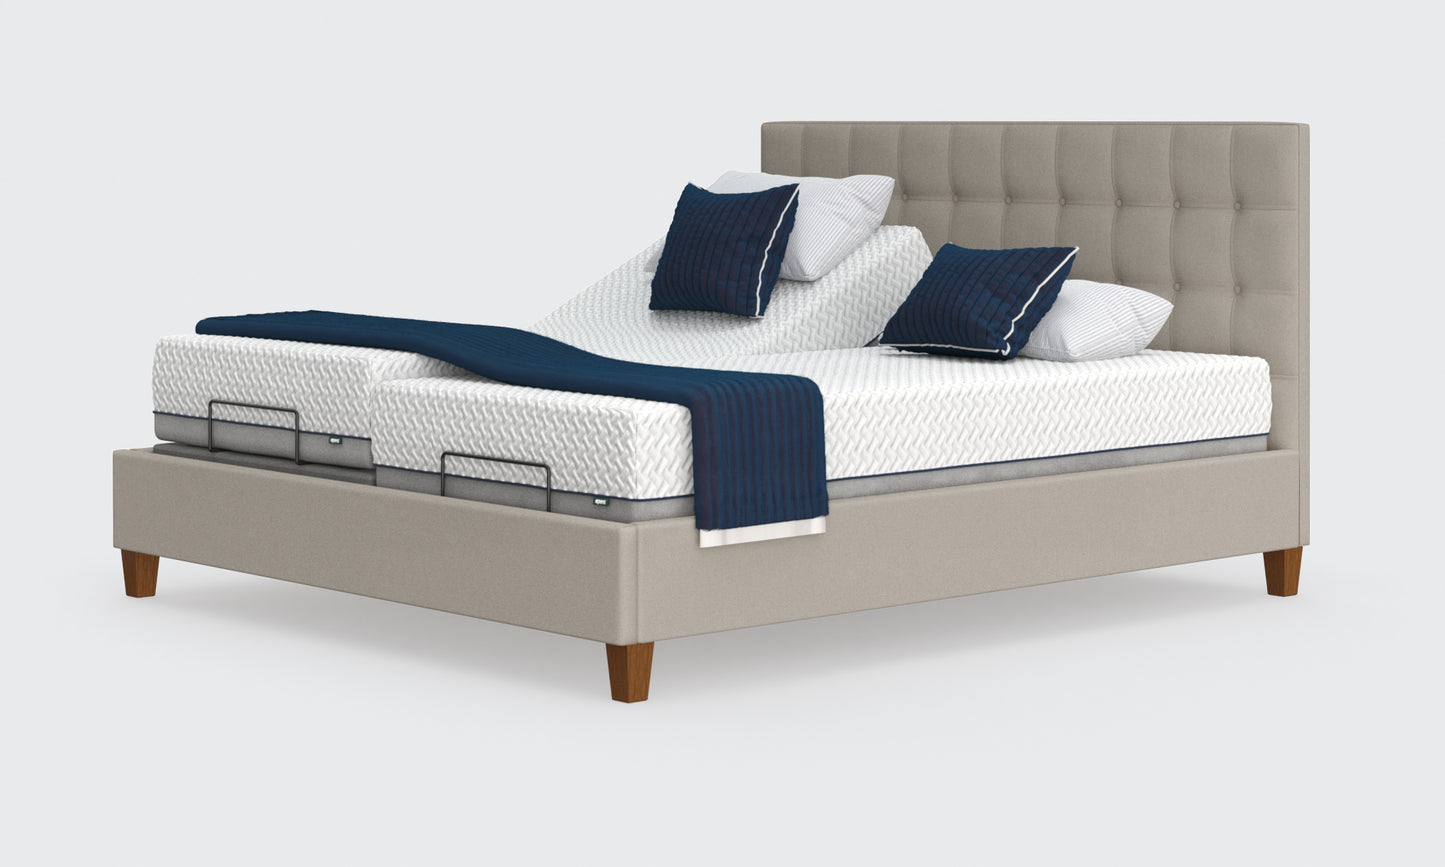 flyte 6ft super king dual bed and mattress in the linen material with the emerald headboard